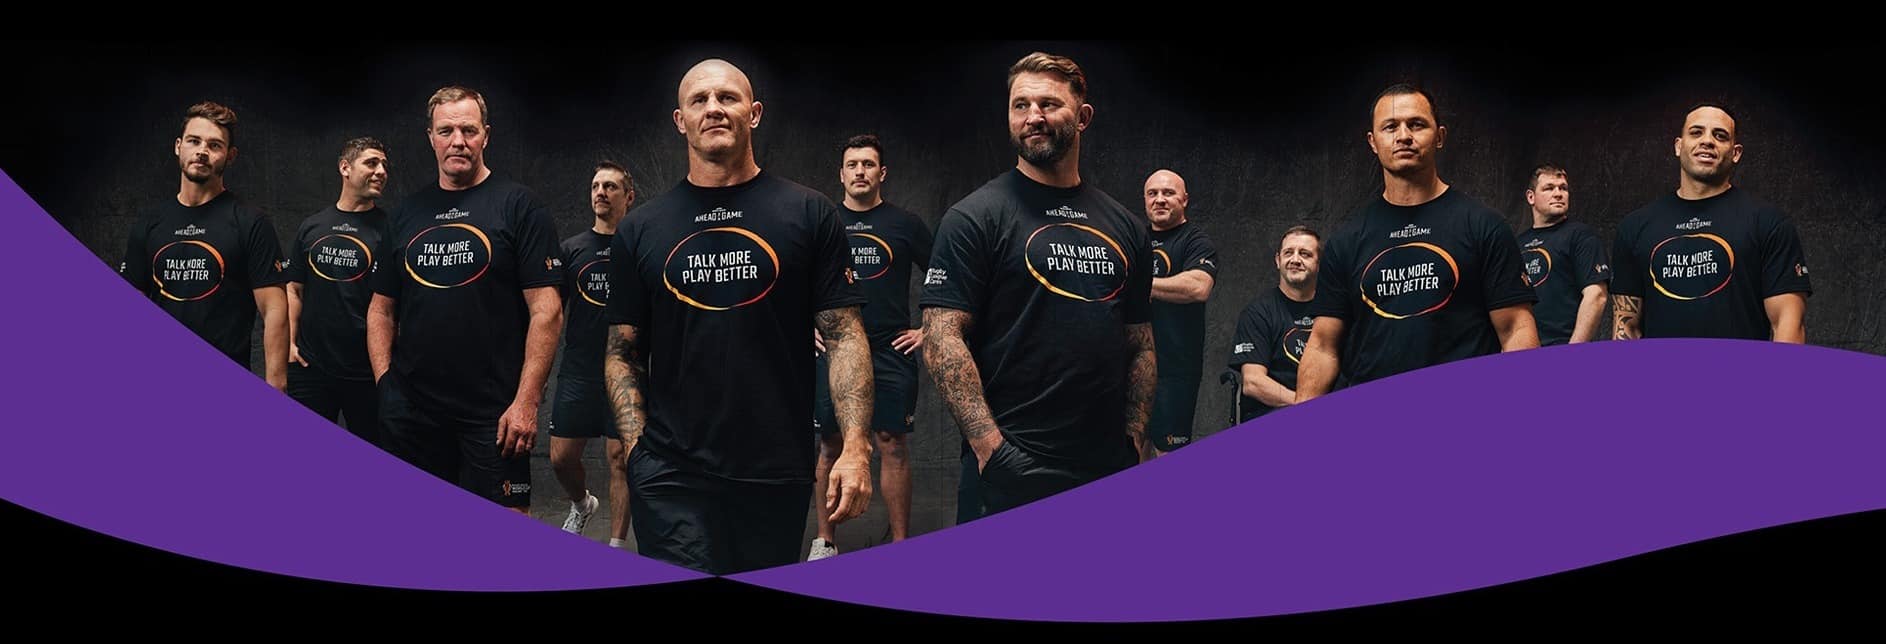 Rugby league world cup encourages men to talk this movember